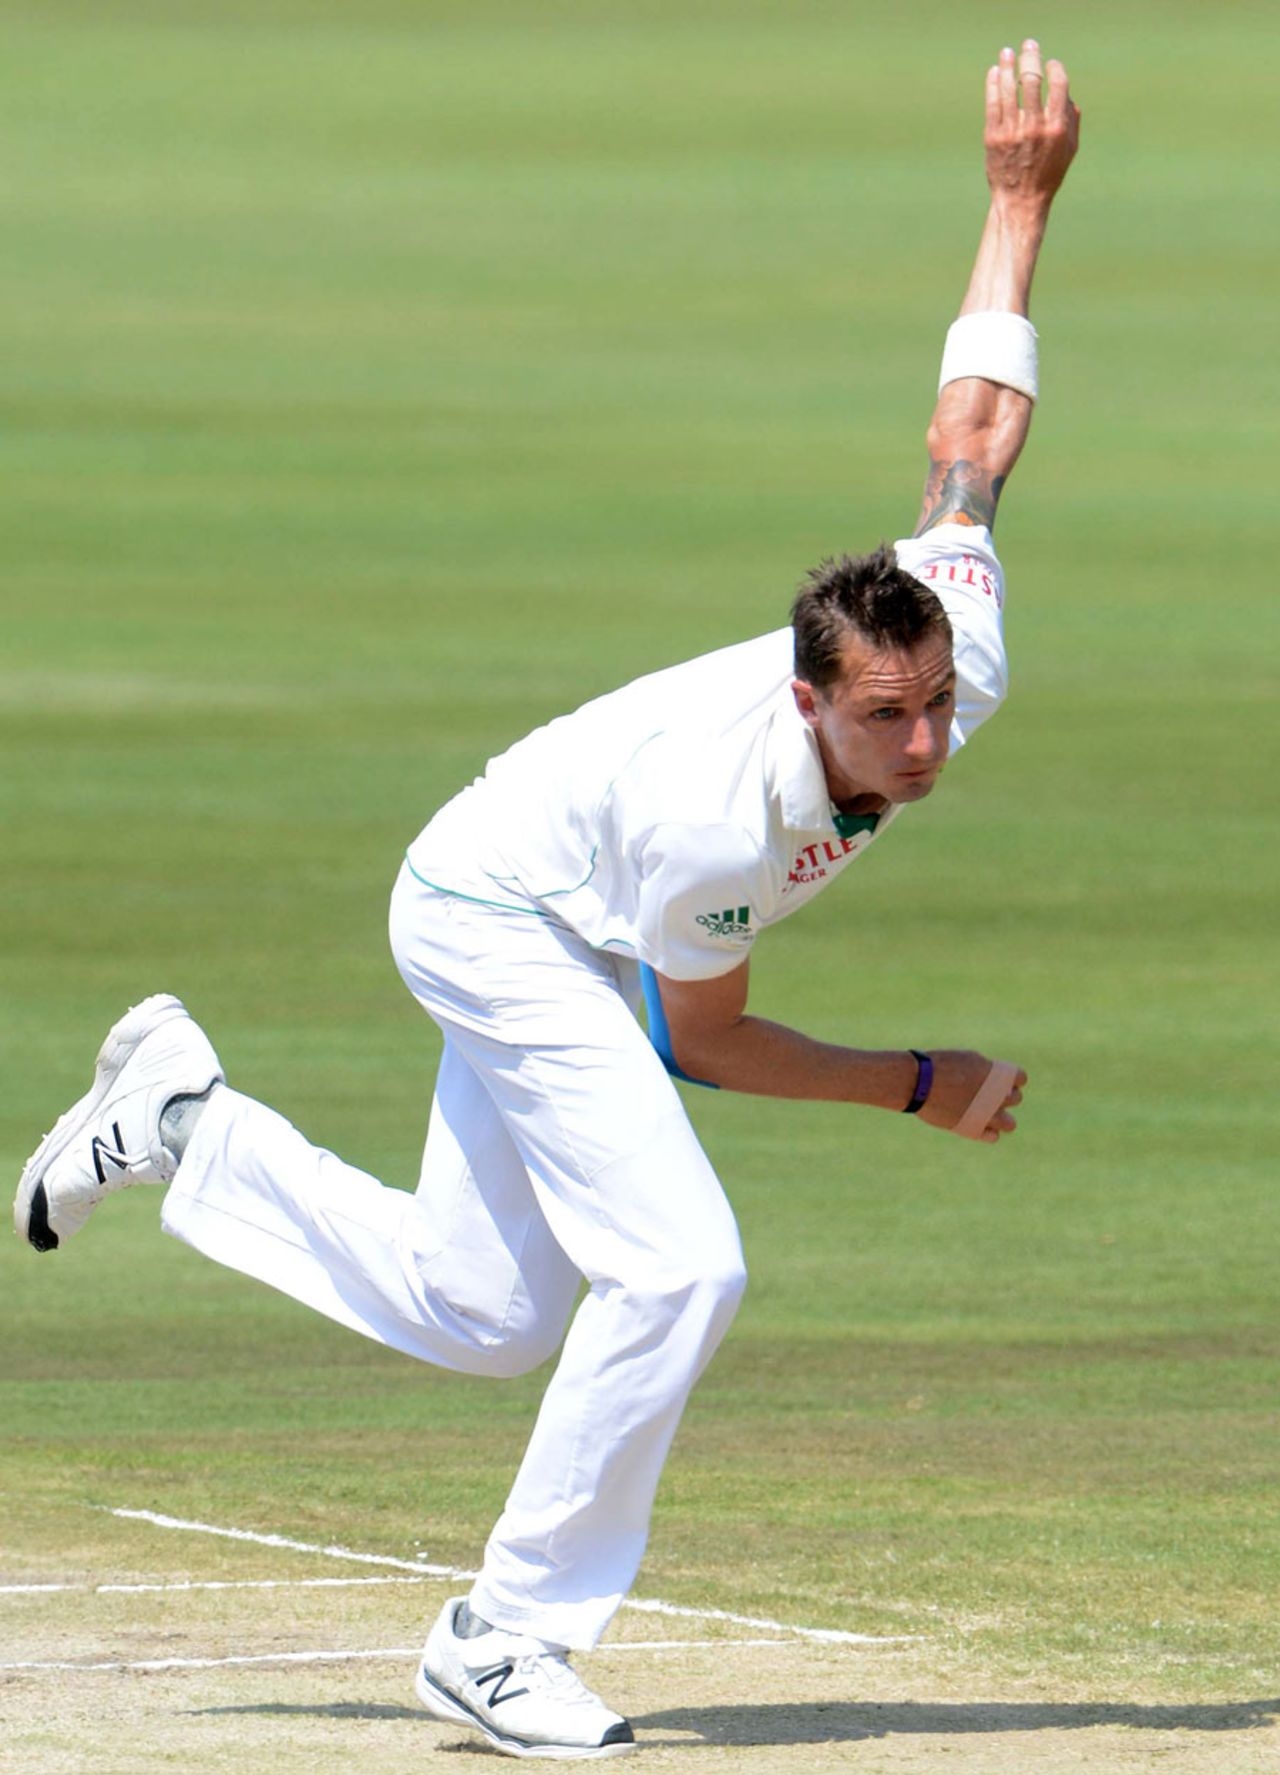 Dale Steyn completes his delivery action, South Africa v Pakistan, 3rd Test, Centurion, 3rd day, February 24, 2013